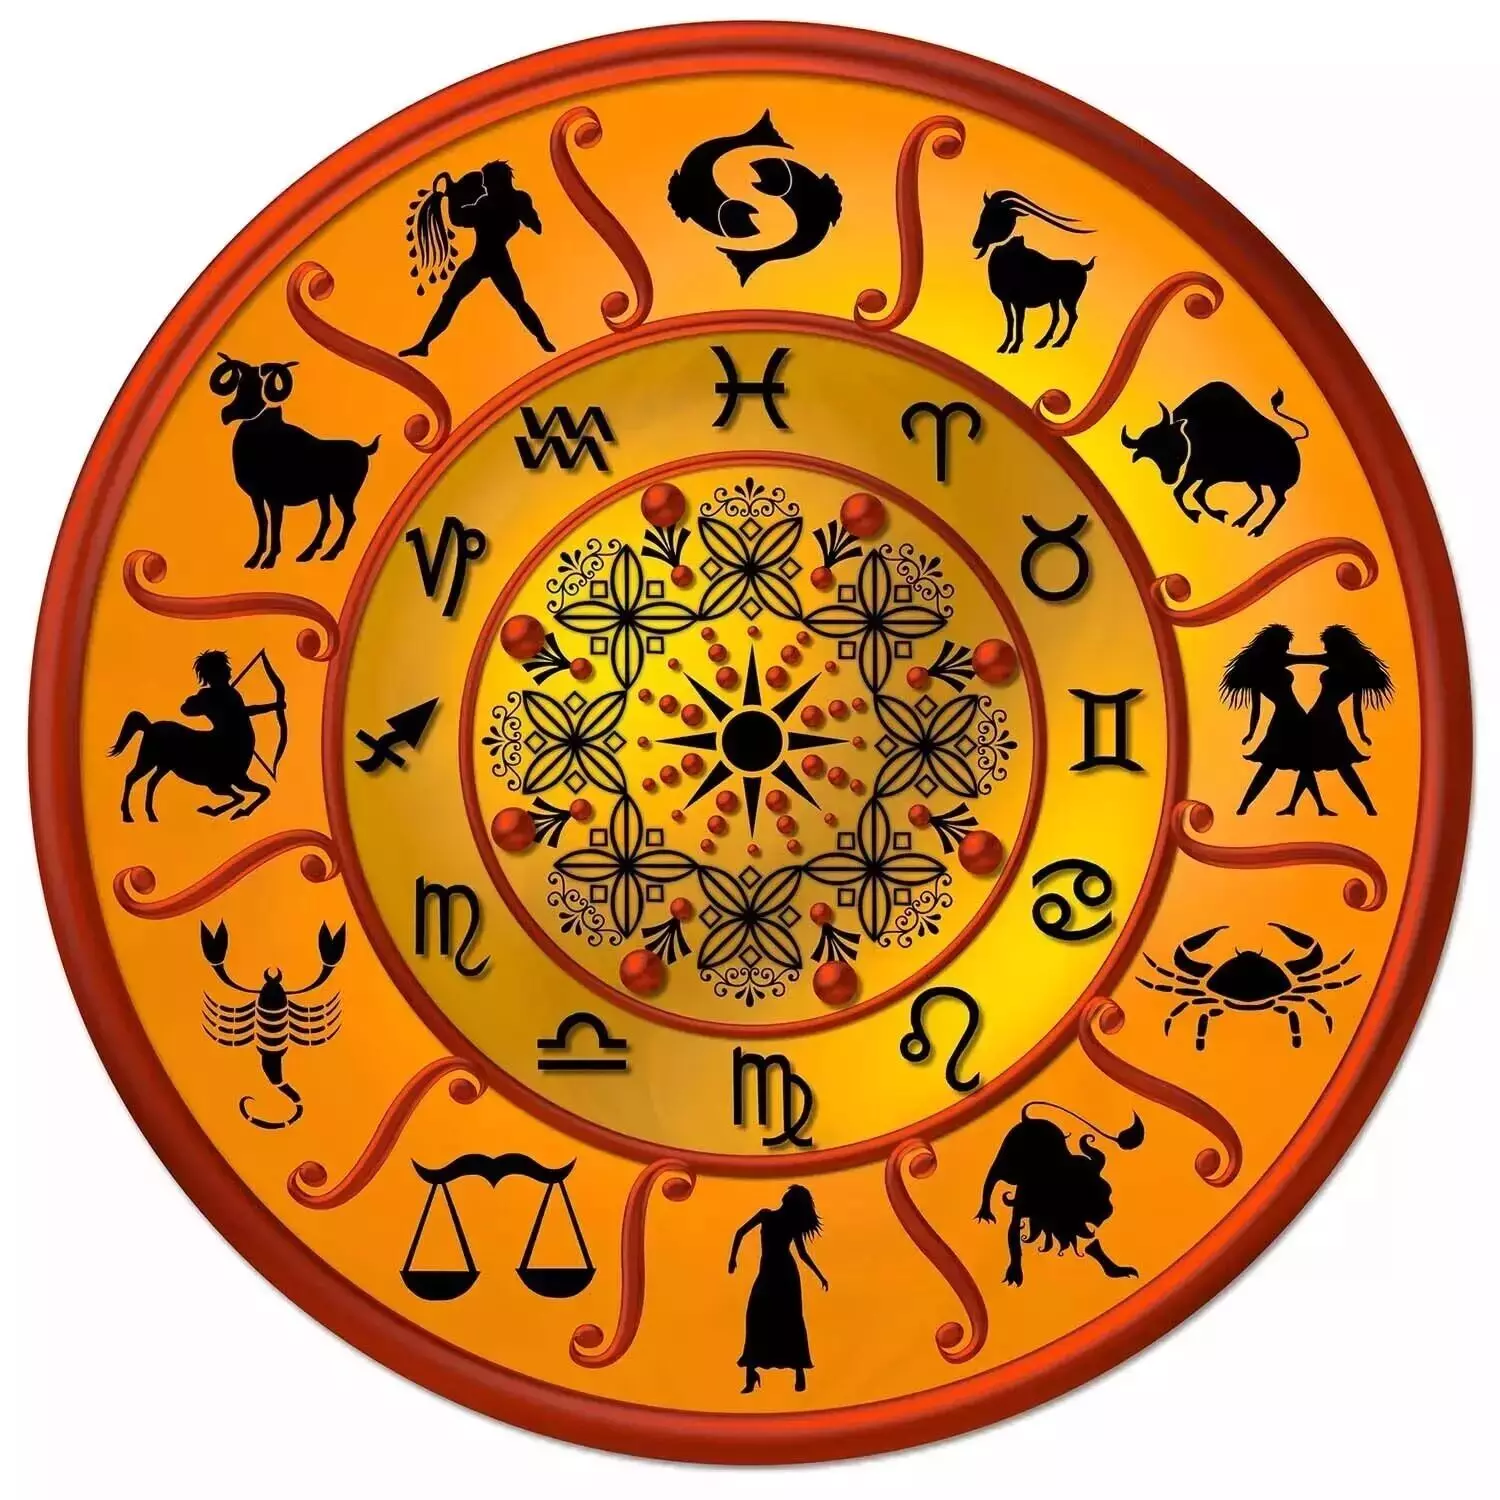 16 February – Know your todays horoscope